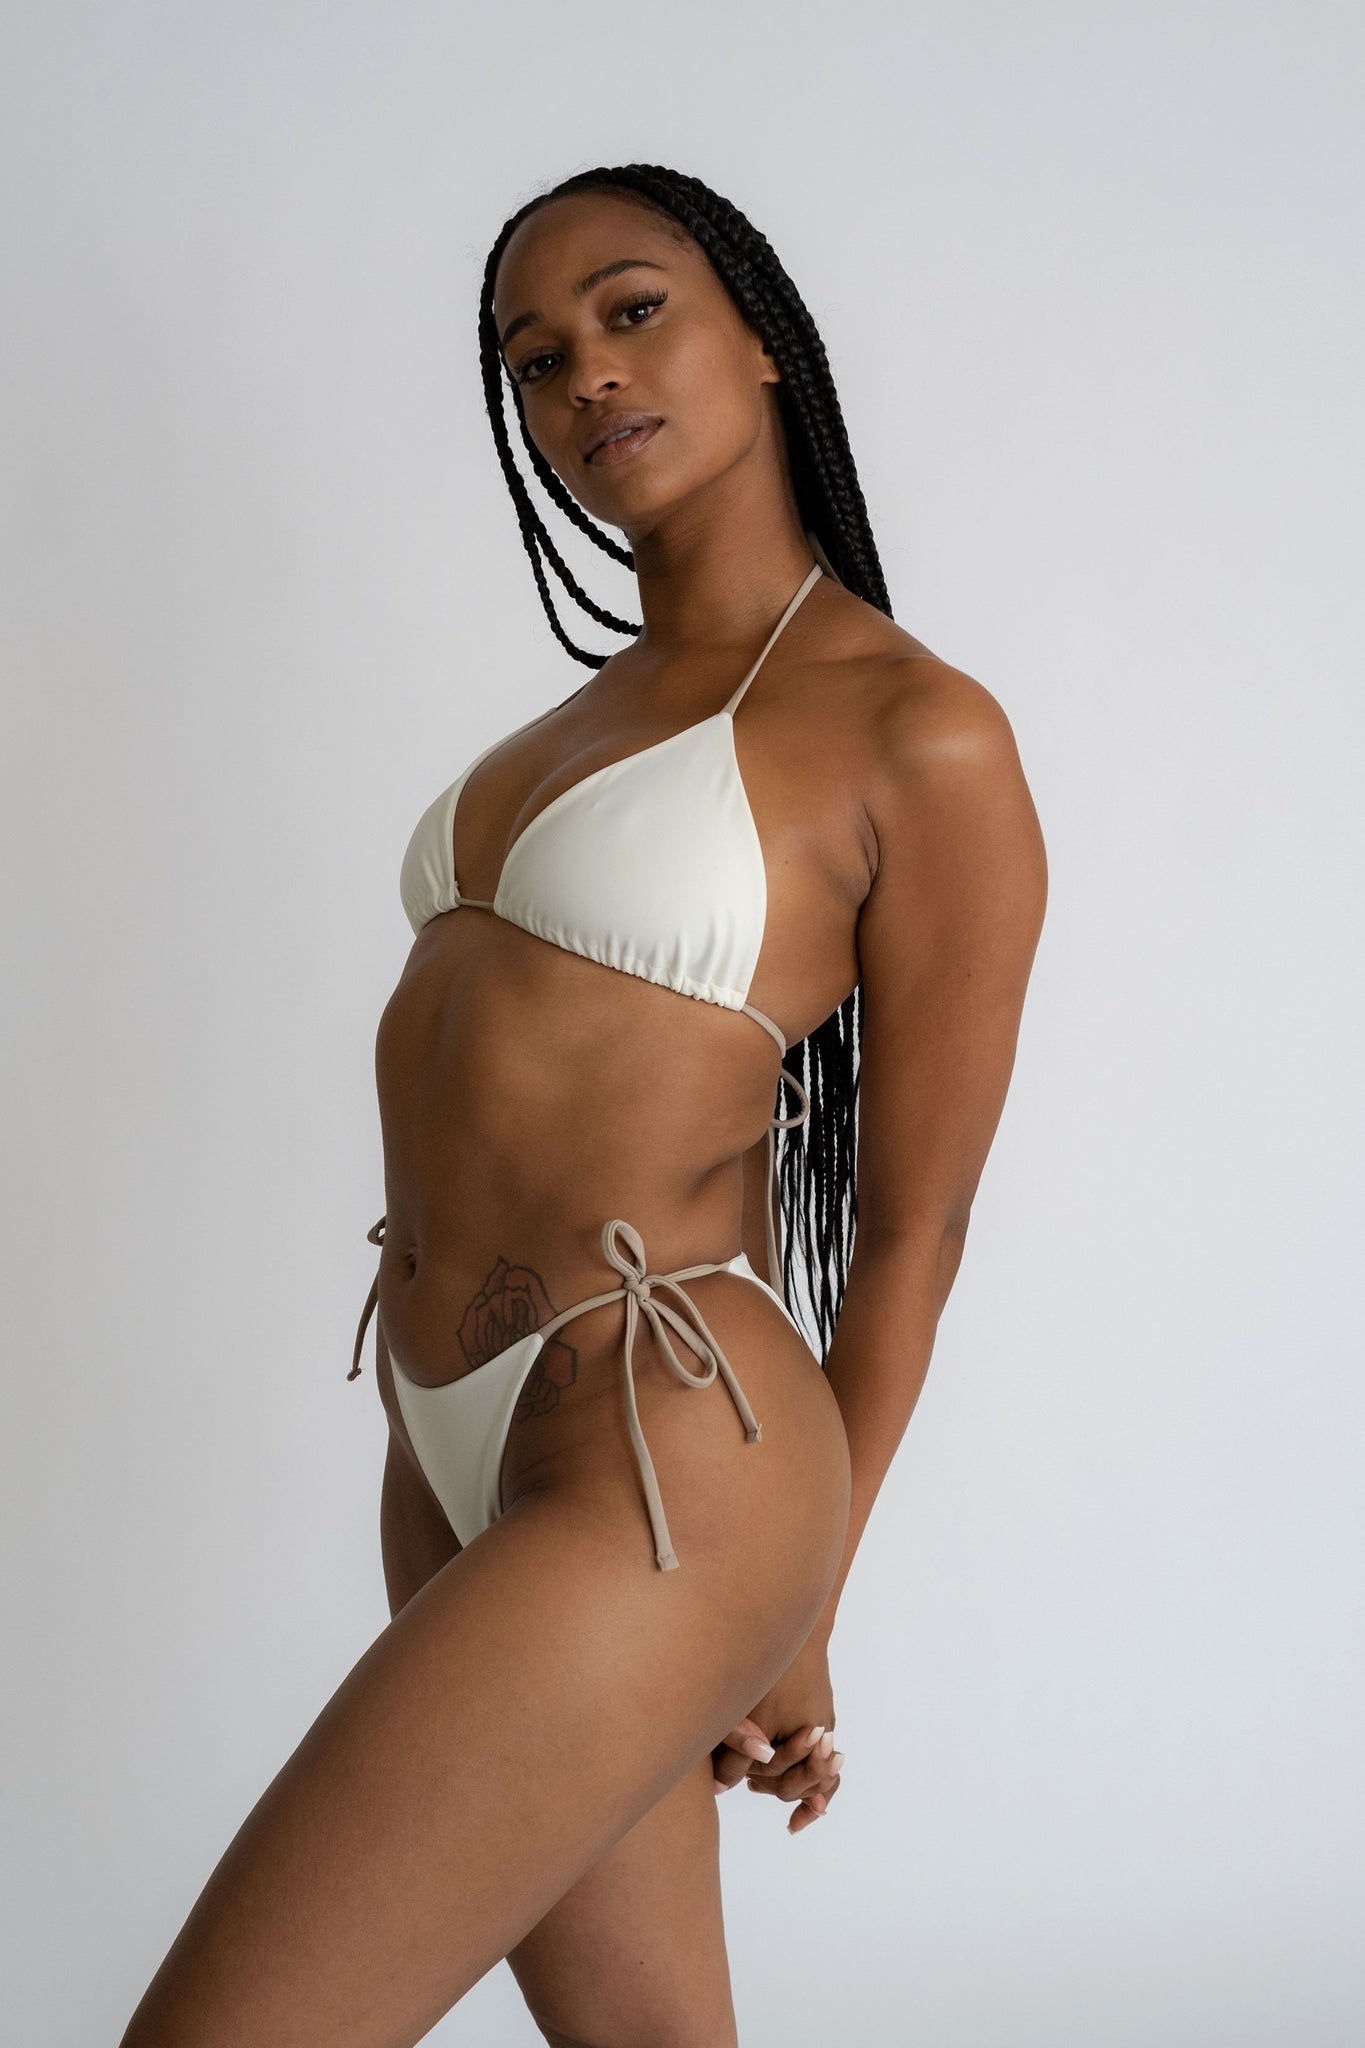 A woman standing with her arms wrapped behind her wearing white triangle bikini bottoms with adjustable nude string ties and a matching white bikini top with nude string ties.